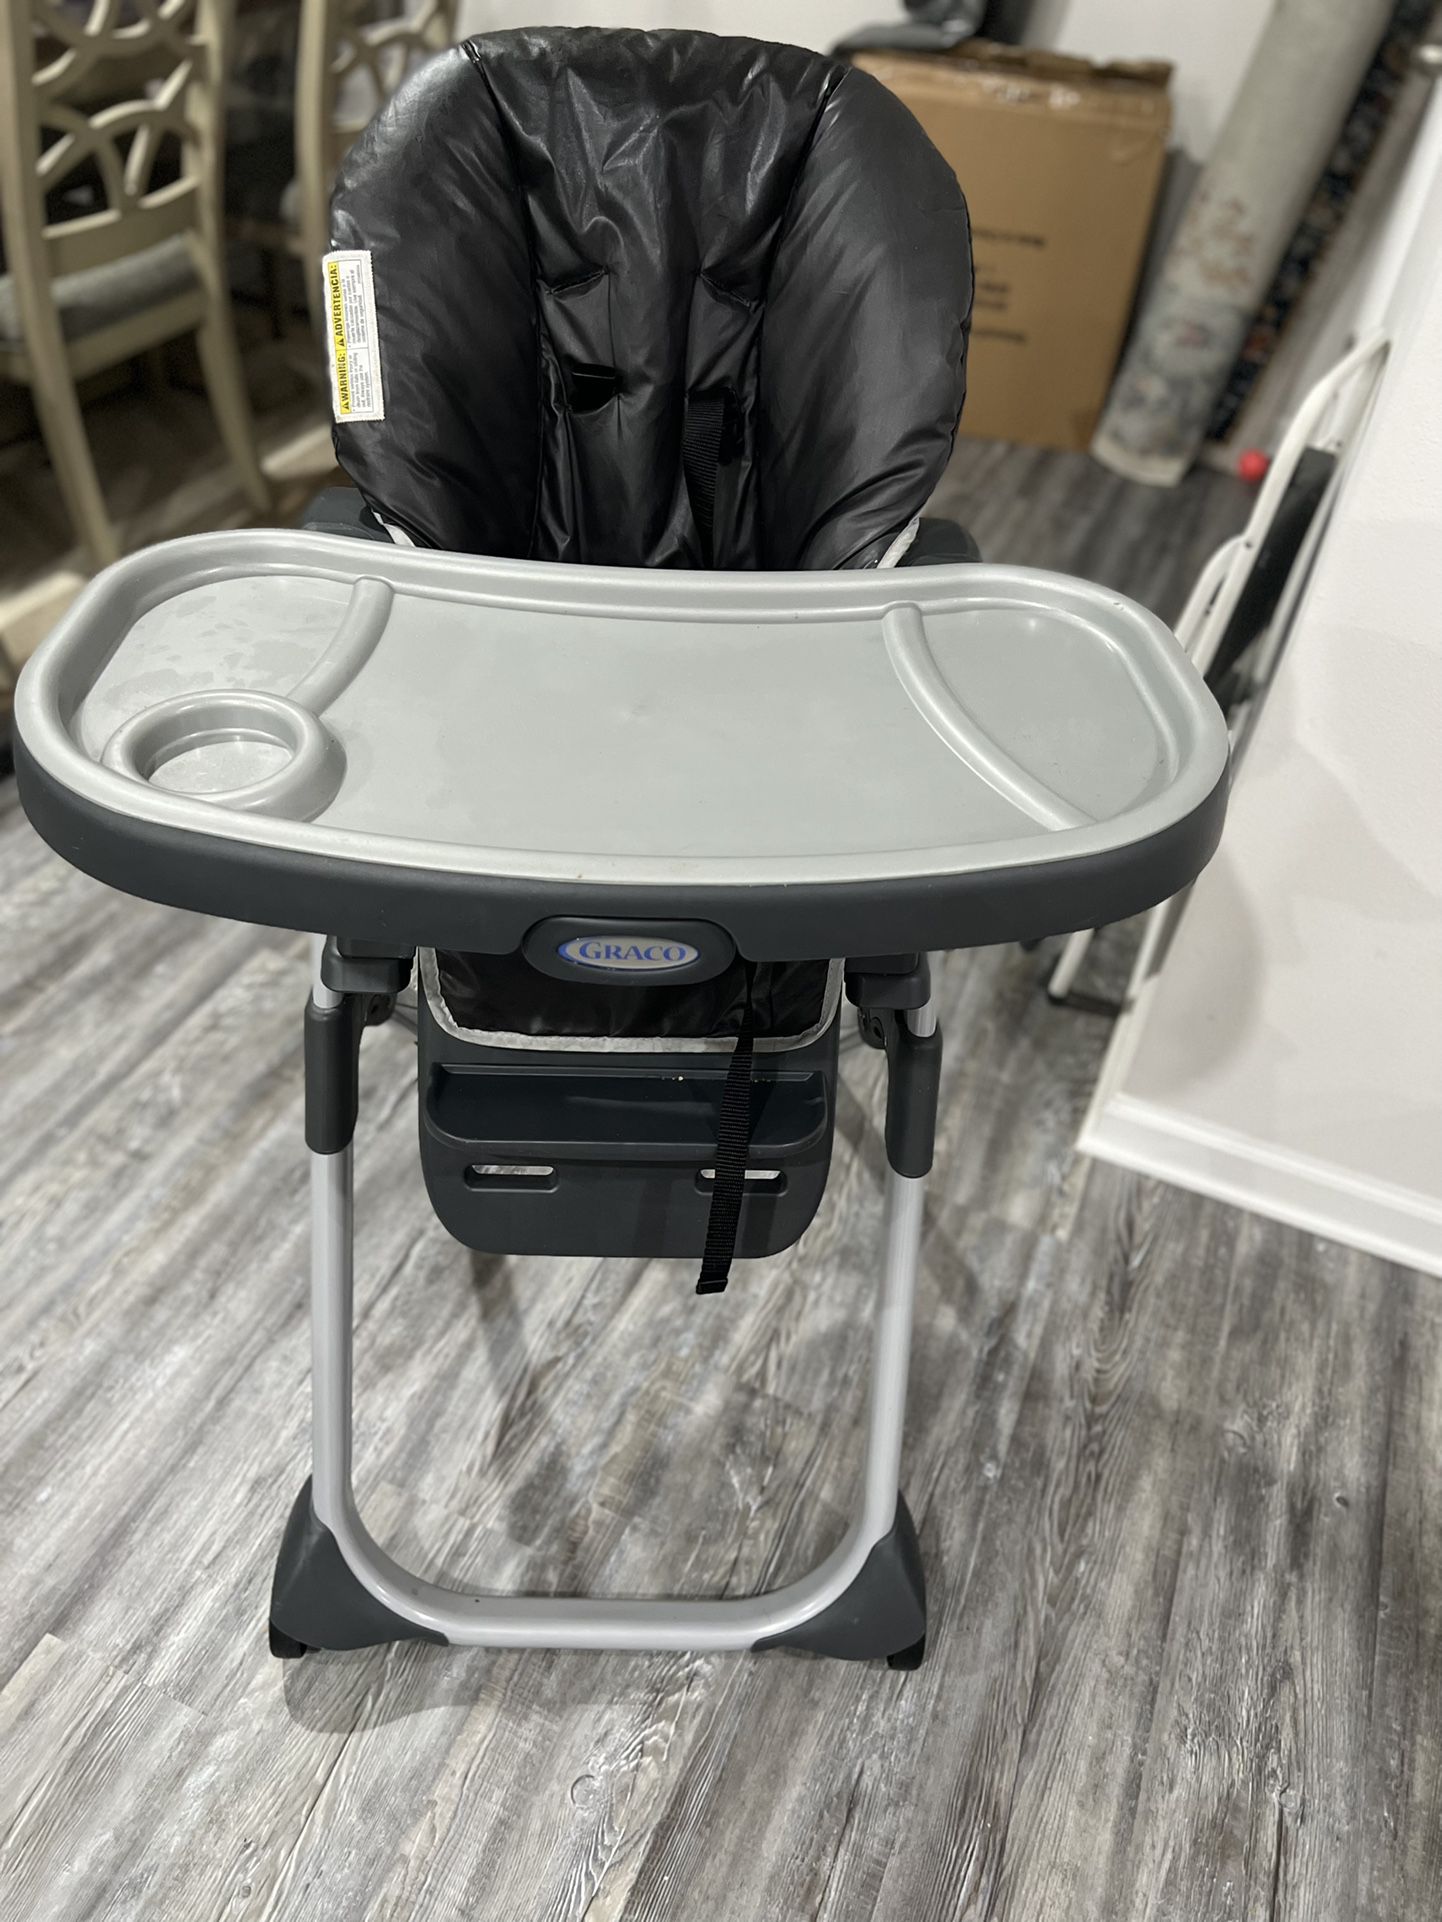 Graco DuoDiner LX foldable High Chair with wheels - Move Out Sale